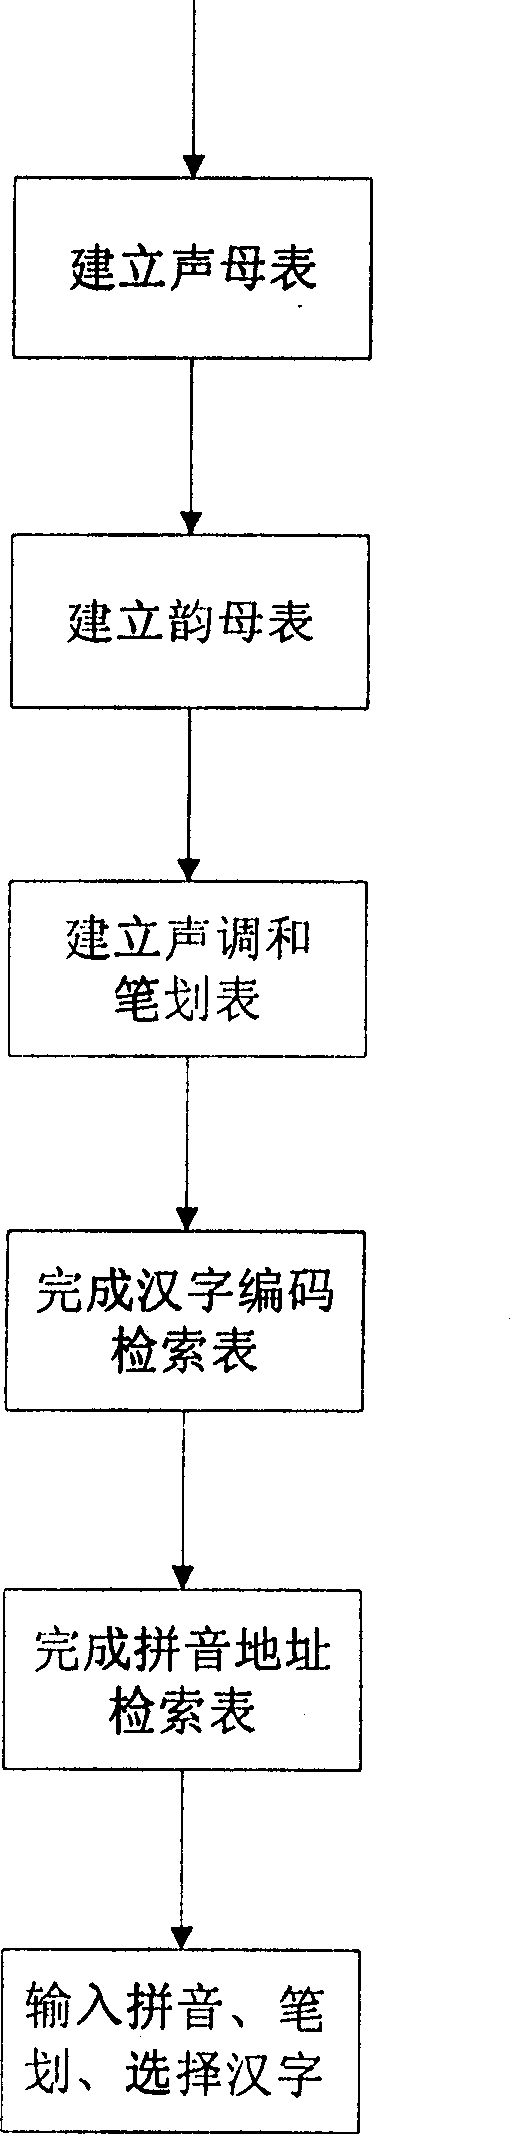 Embedded applied Chinese character inputting method